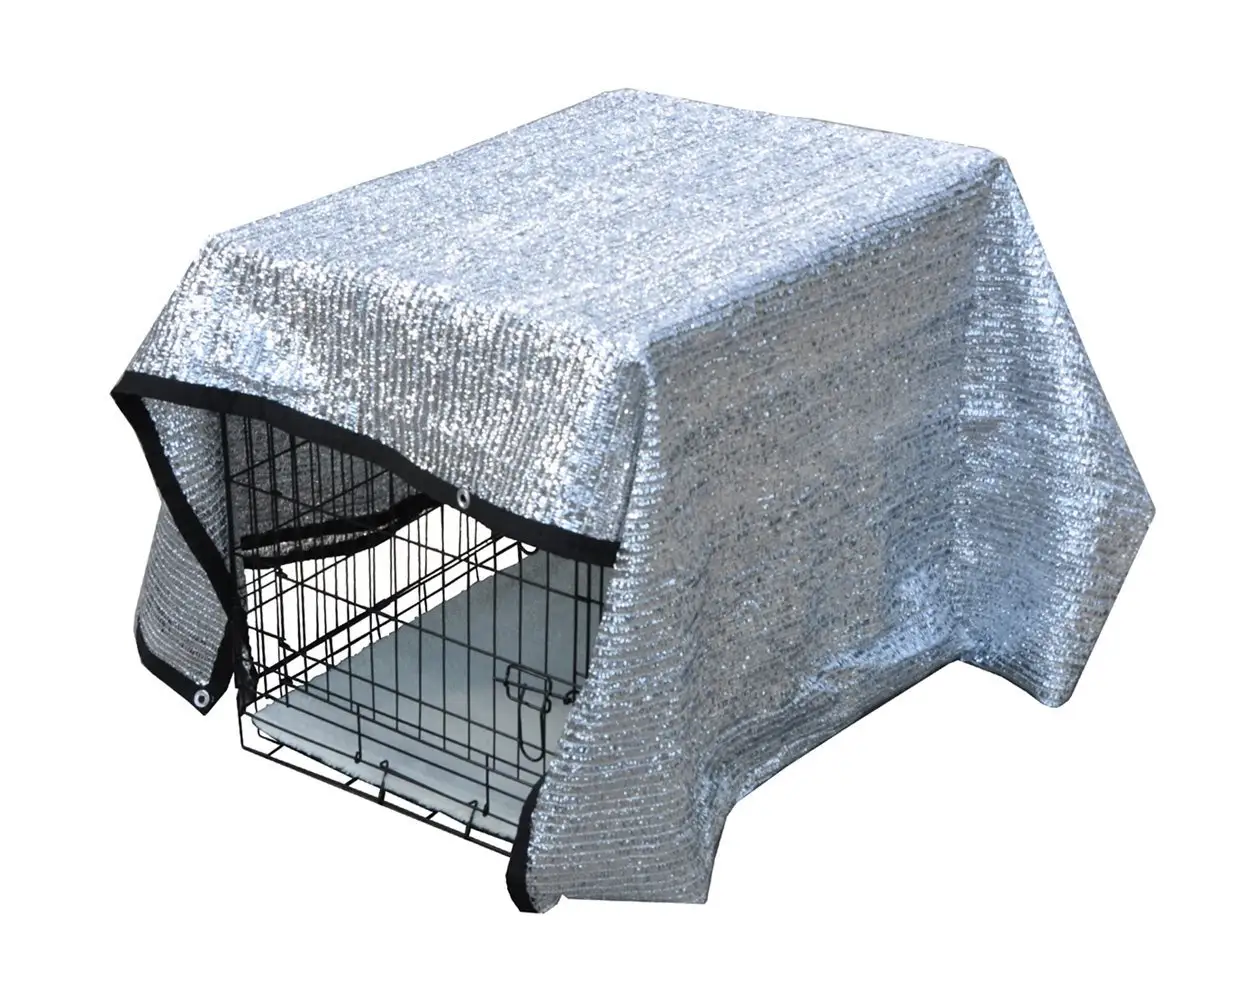 Camping tent cooling covers 85% aluminum shade cloth ,sun reflective shade fabric cover for Dog kennel,poly silver shade mesh